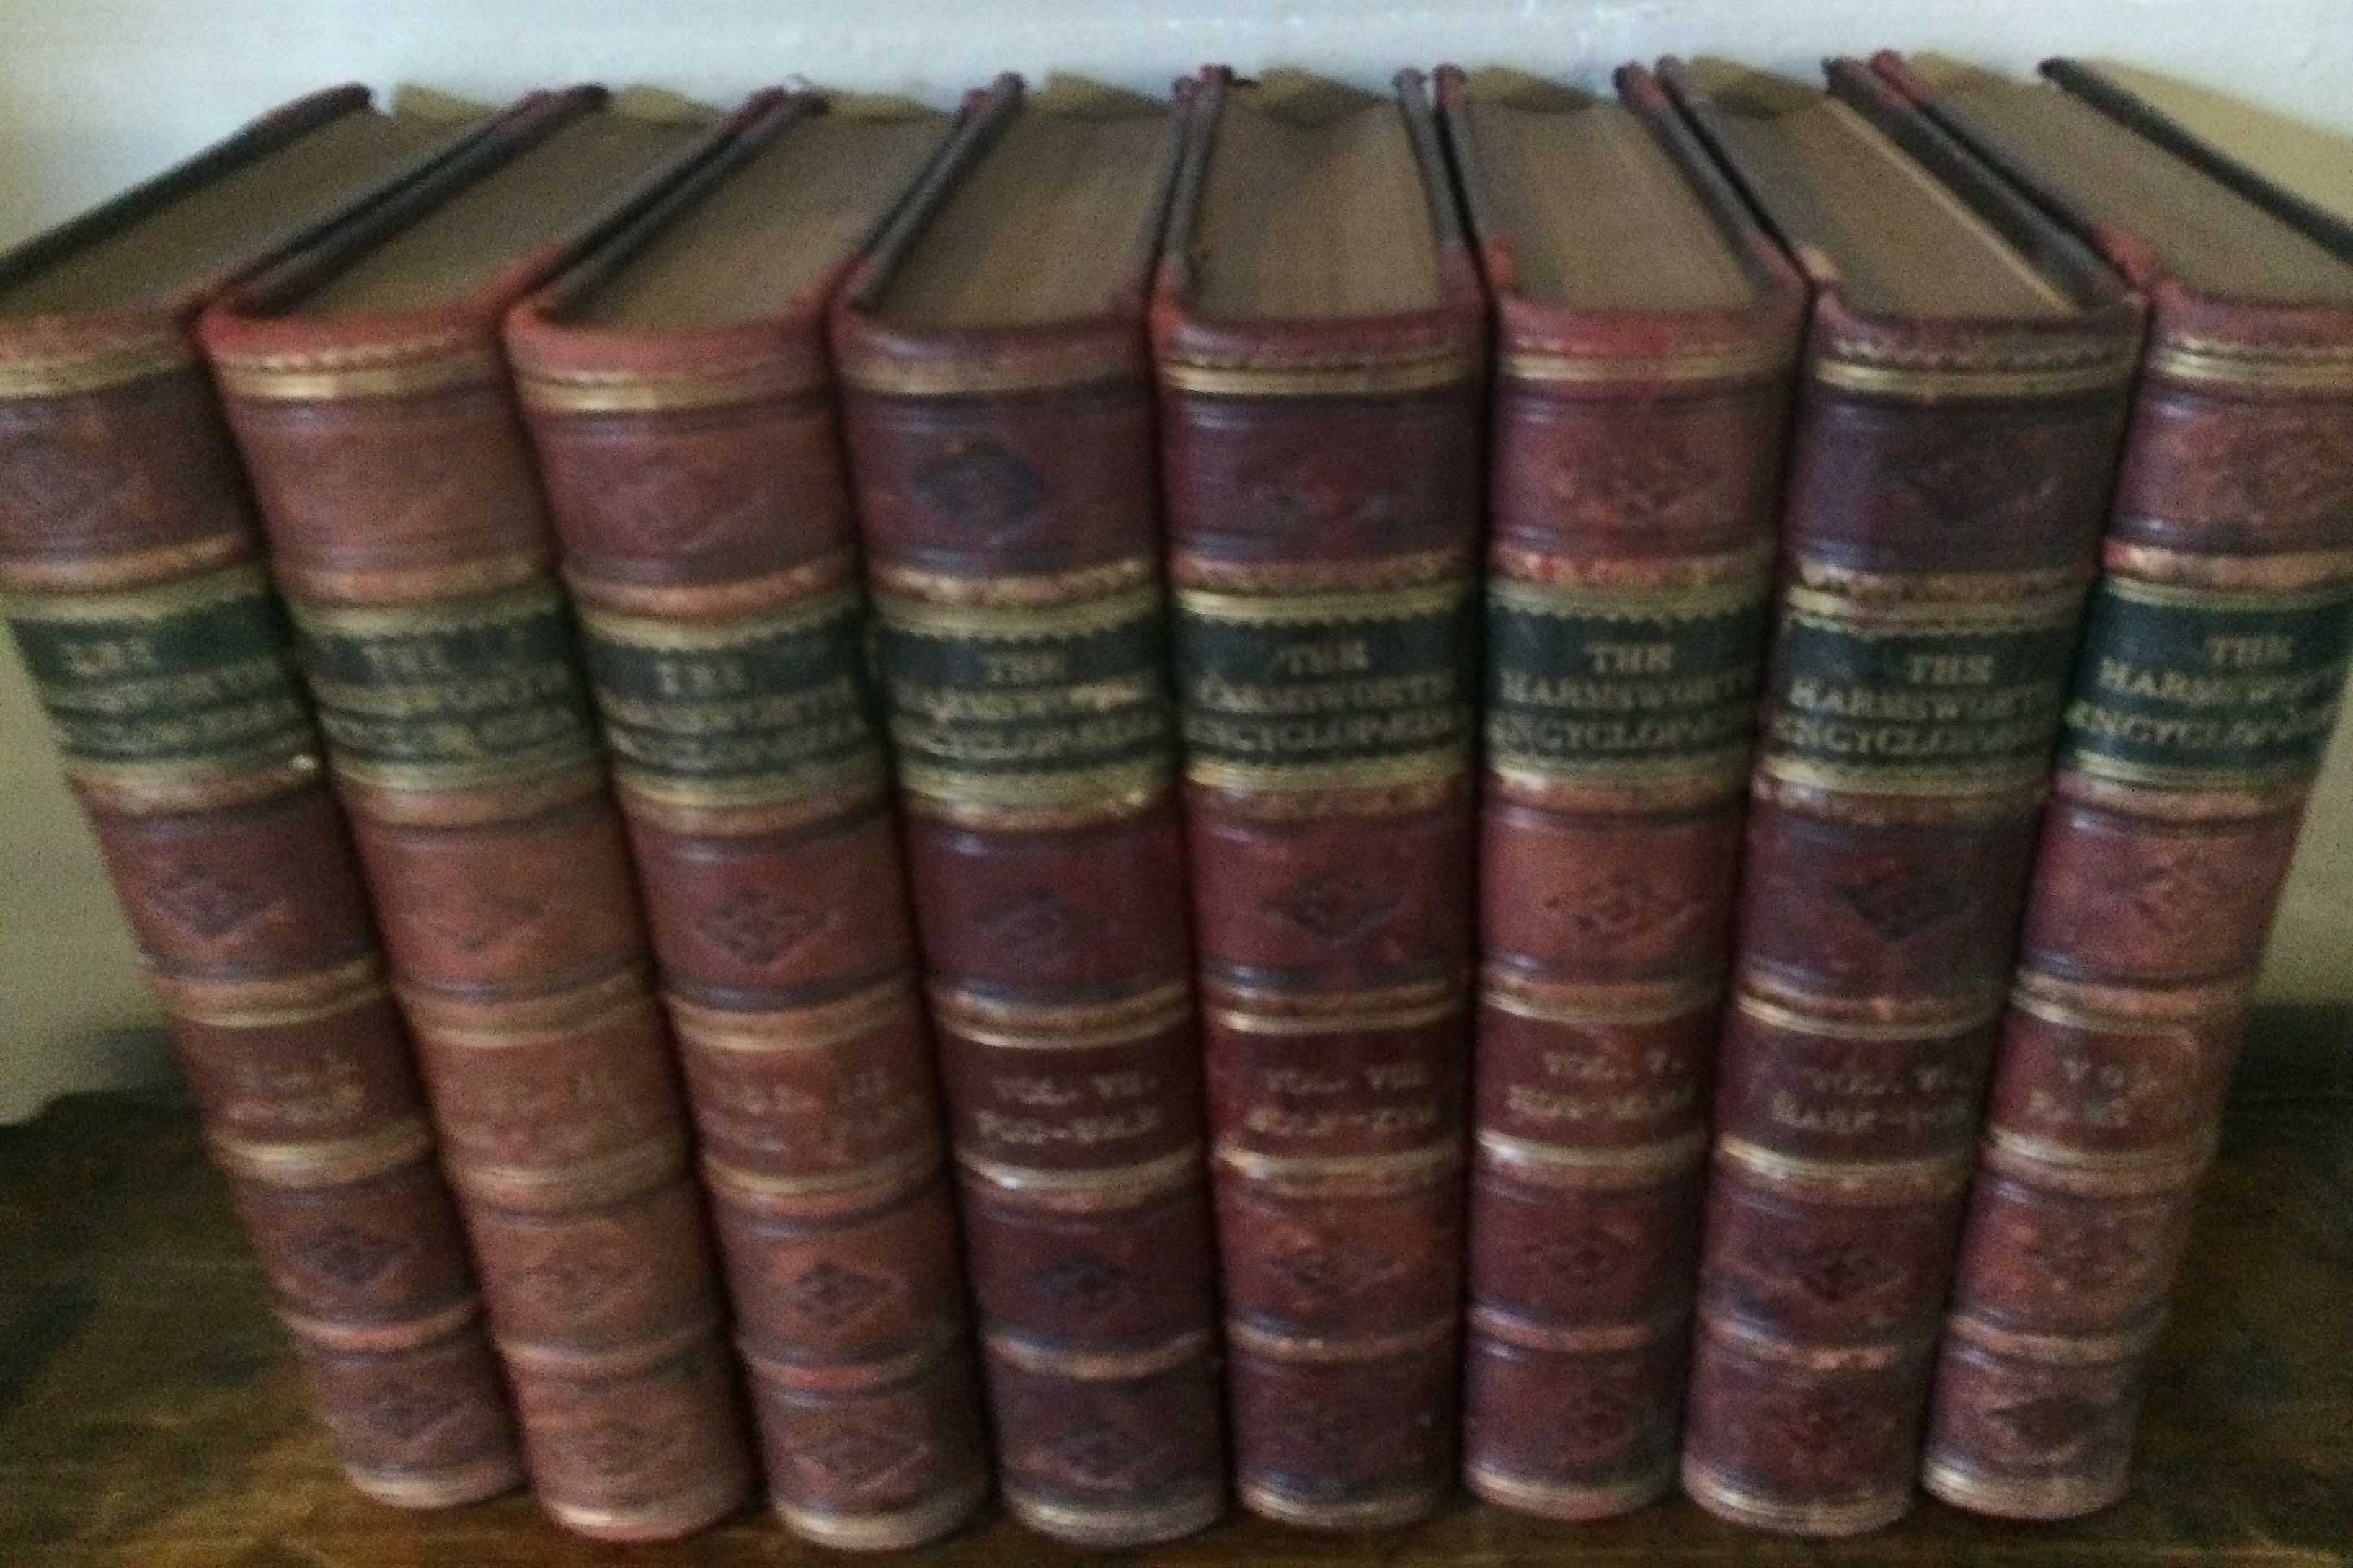 8 volume set of Harmsworths Encyclopedia  bound in dark red leather. 8 volumes. Early 20thC.